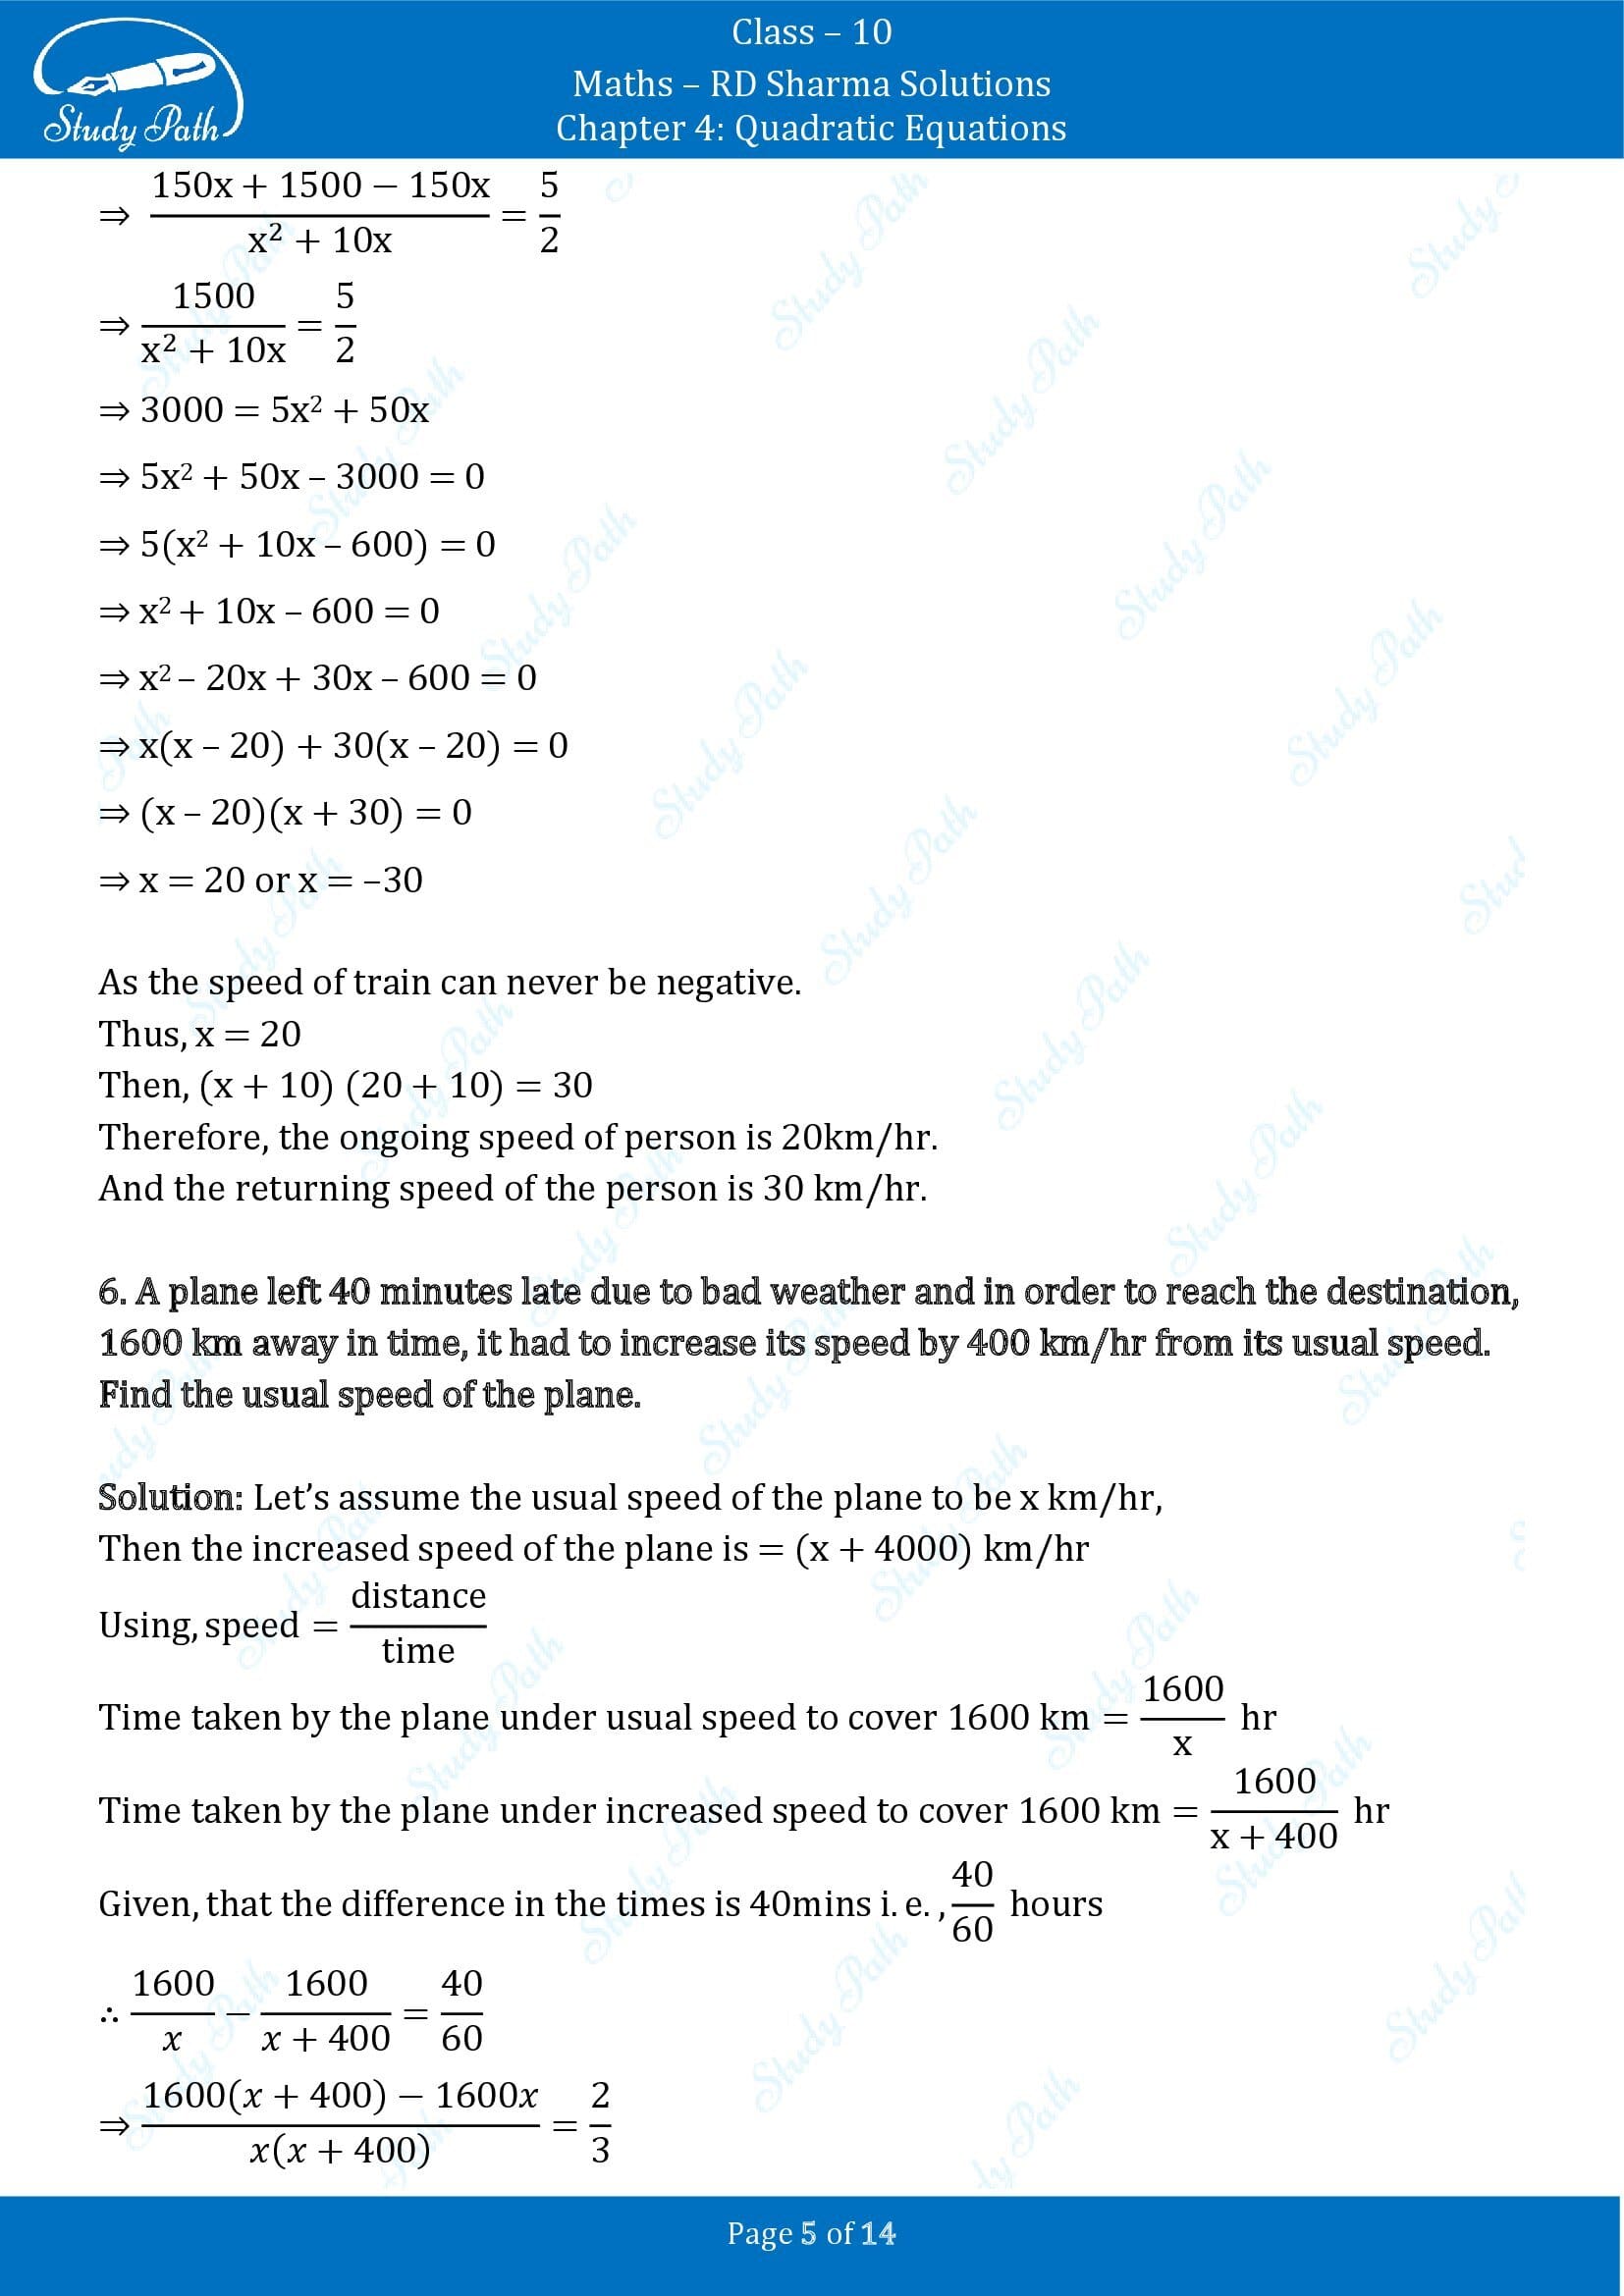 RD Sharma Solutions Class 10 Chapter 4 Quadratic Equations Exercise 4.8 00005